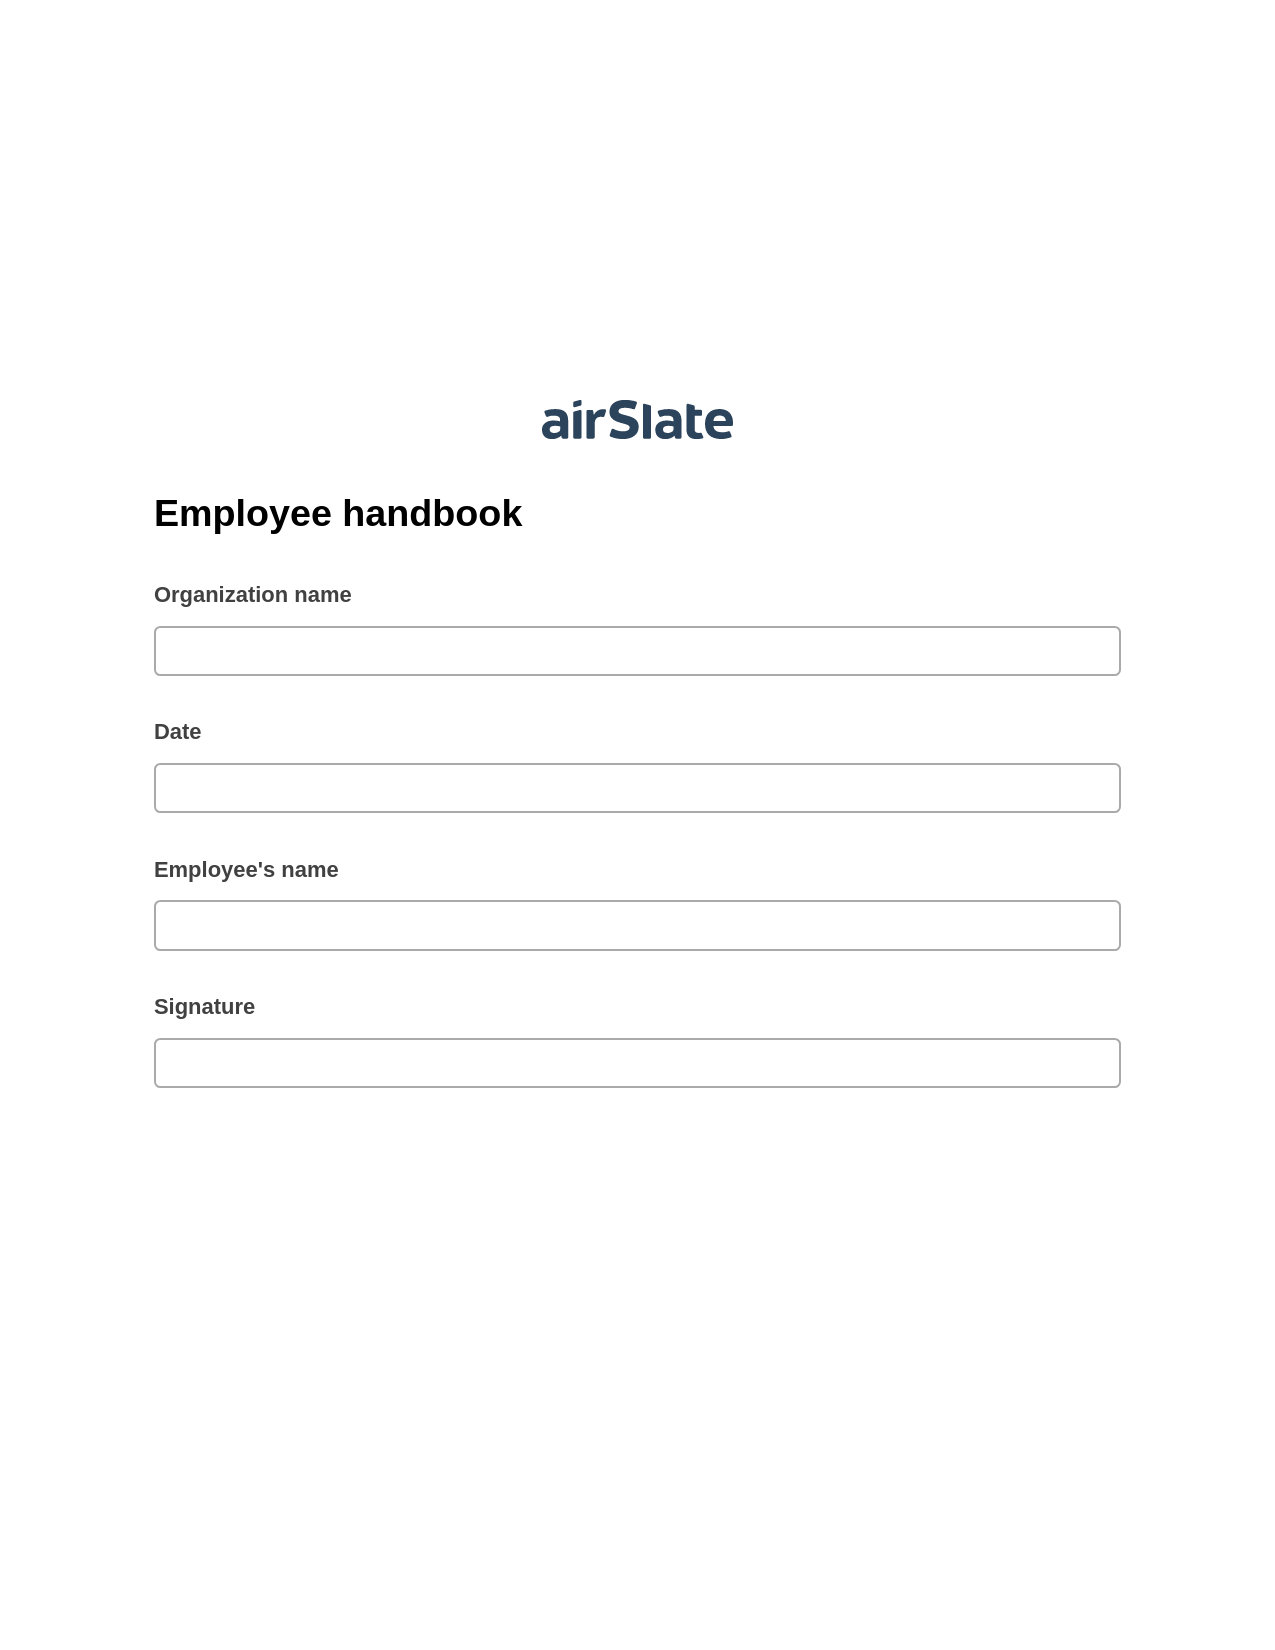 Employee handbook Pre-fill Dropdowns from Excel Bot, Mailchimp add recipient to audience Bot, Post-finish Document Bot